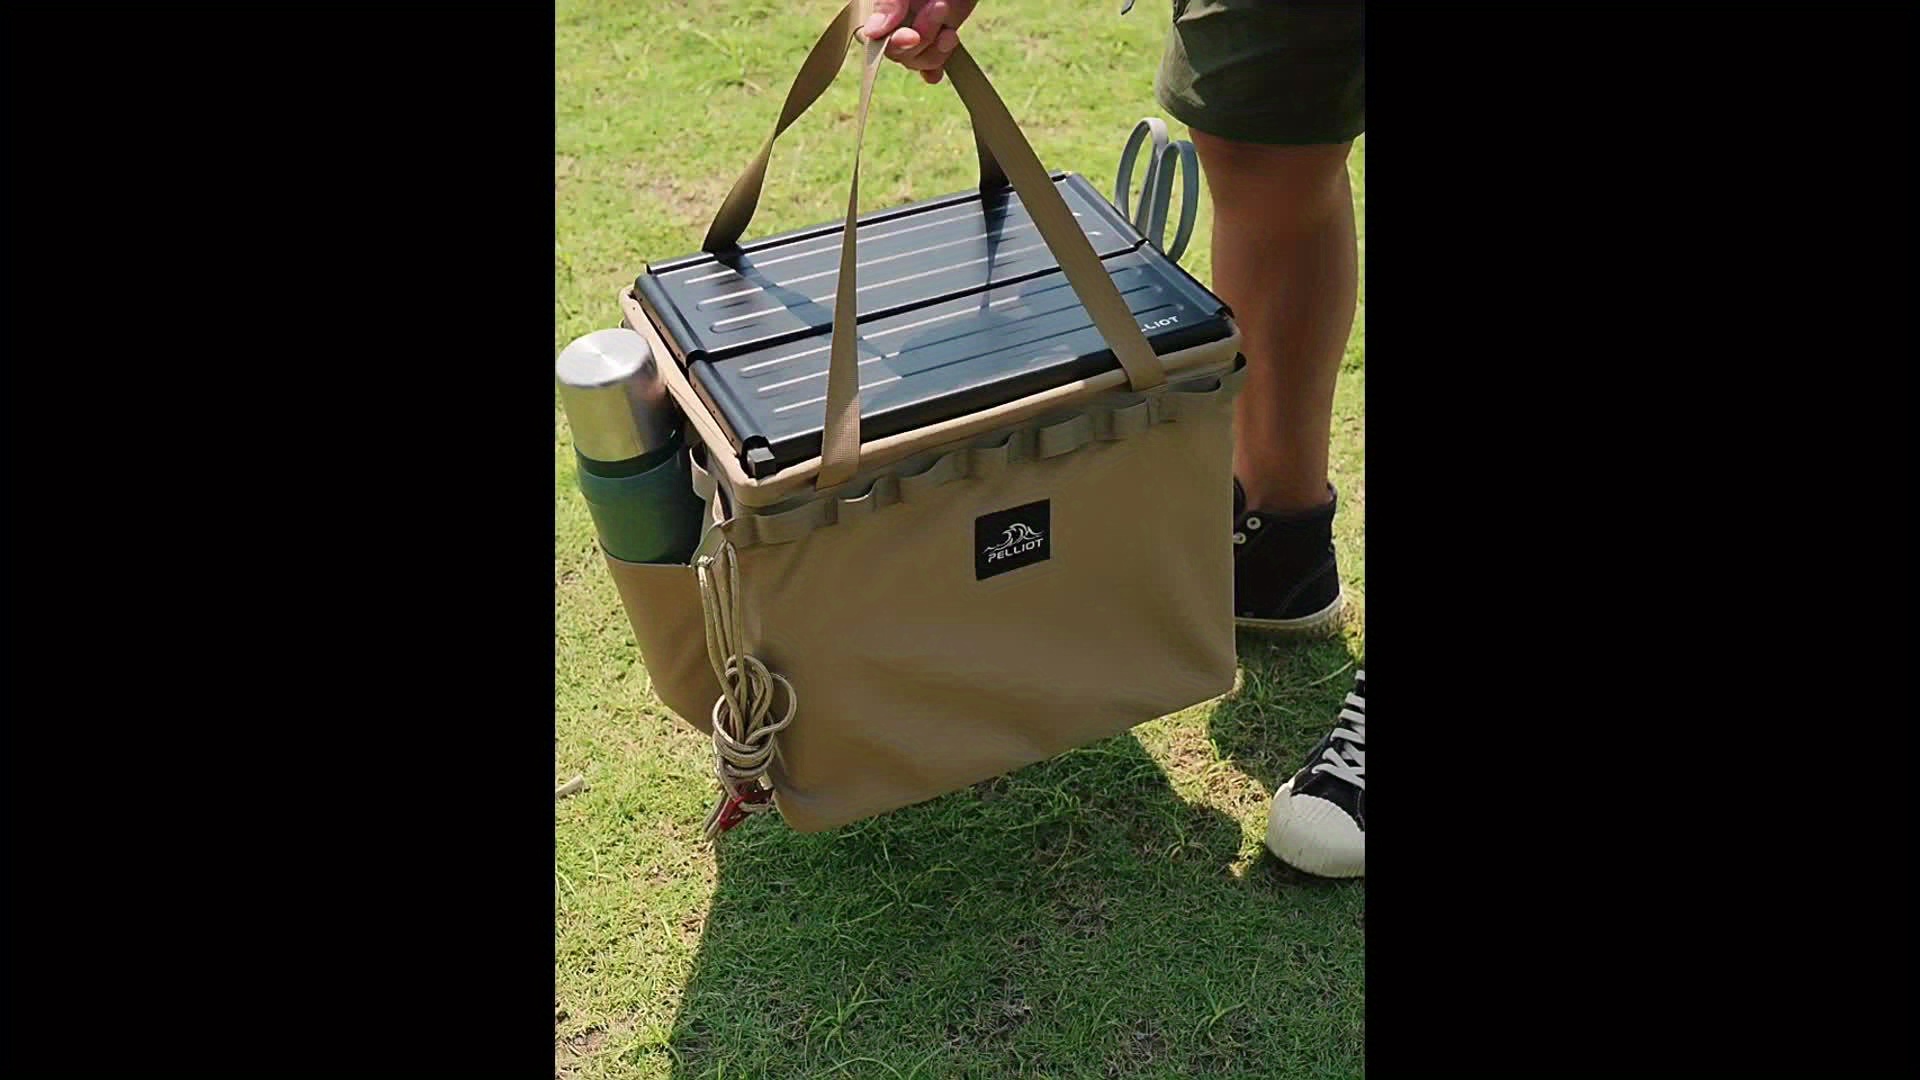 Camping Storage Bag, Portable Multifunctional Tools Storage Box For Outdoor Camping Hiking - Click Image to Close